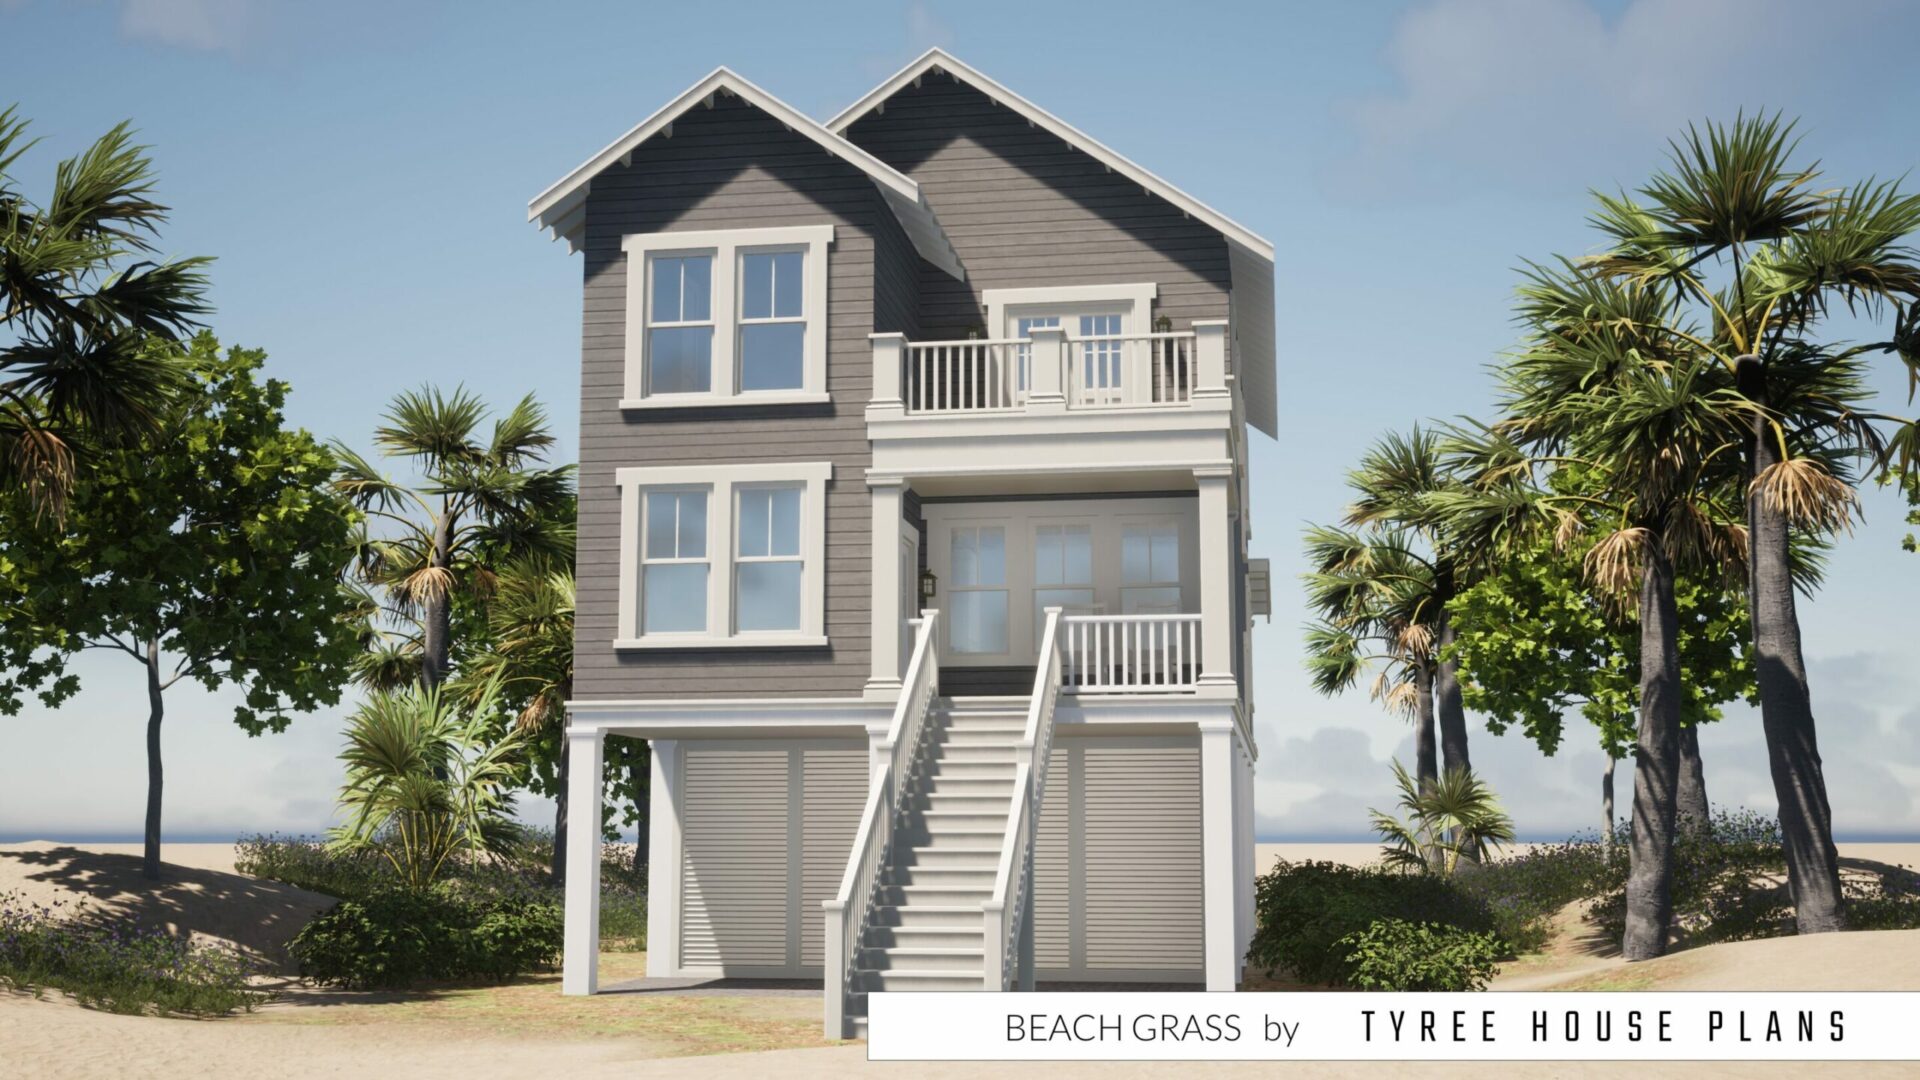 Rear porch with upper sundeck. Beach Grass by Tyree House Plans.